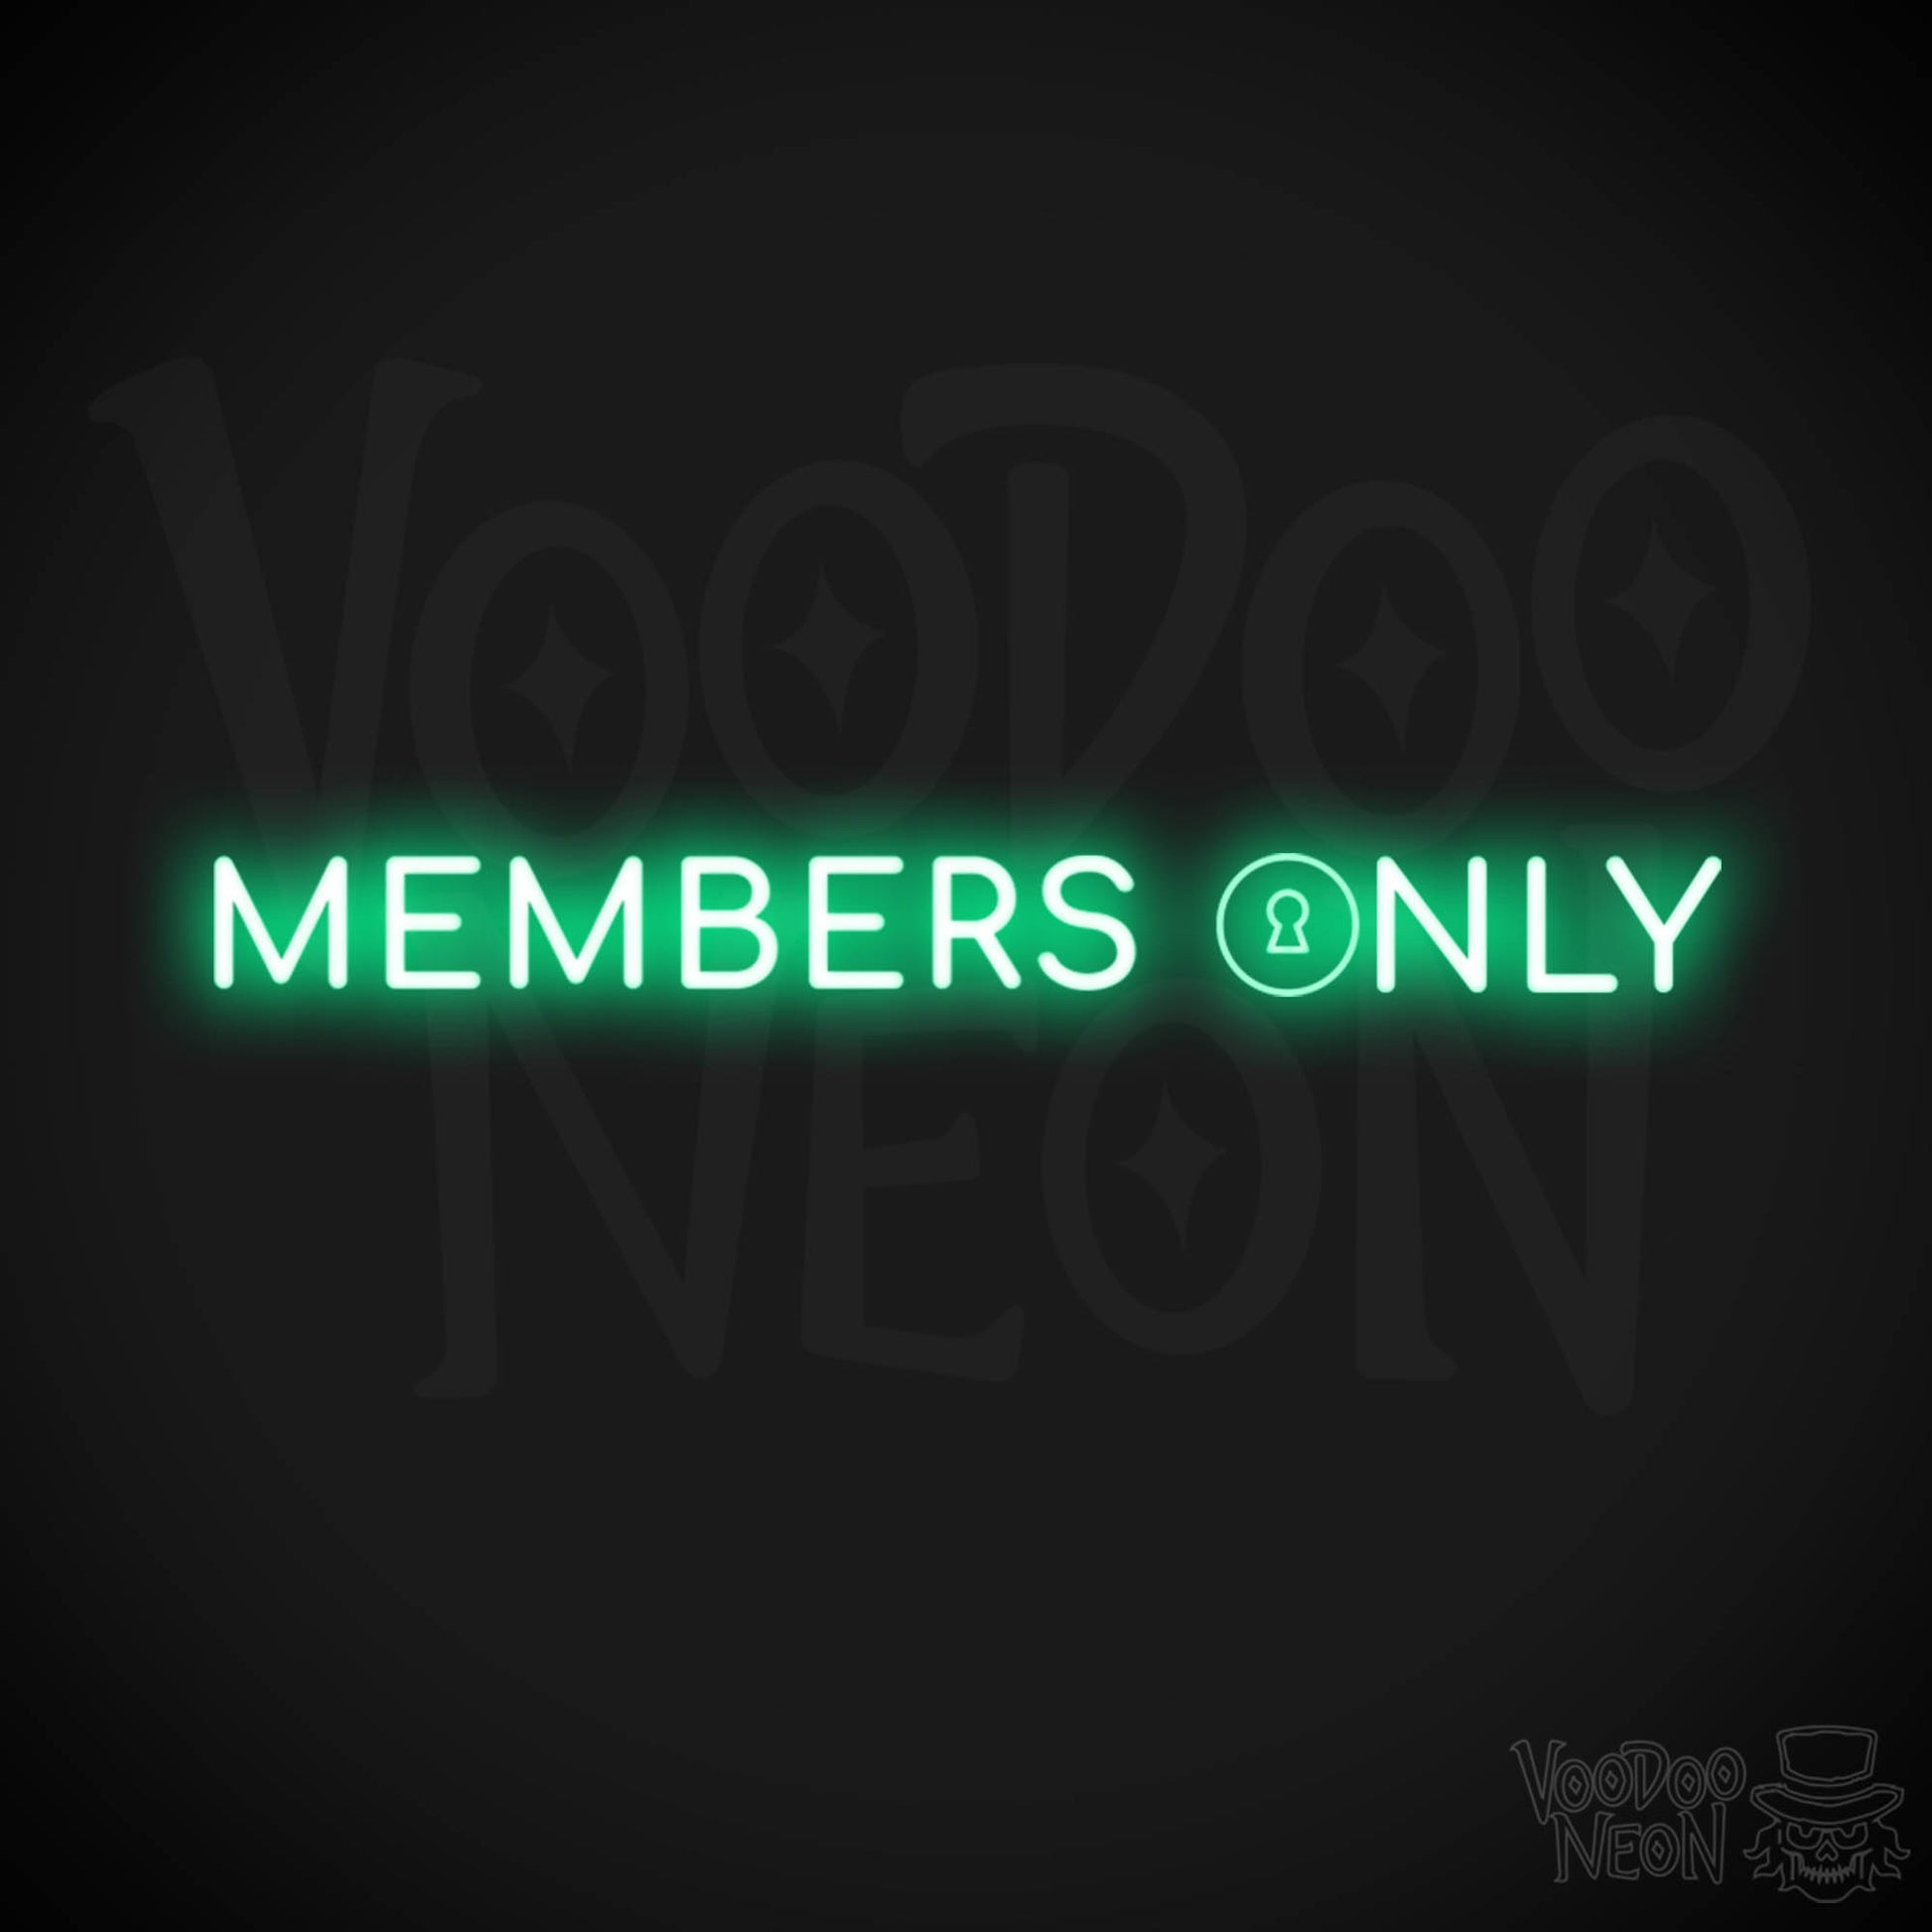 Members Only Neon Sign - Neon Members Only Sign - Color Green